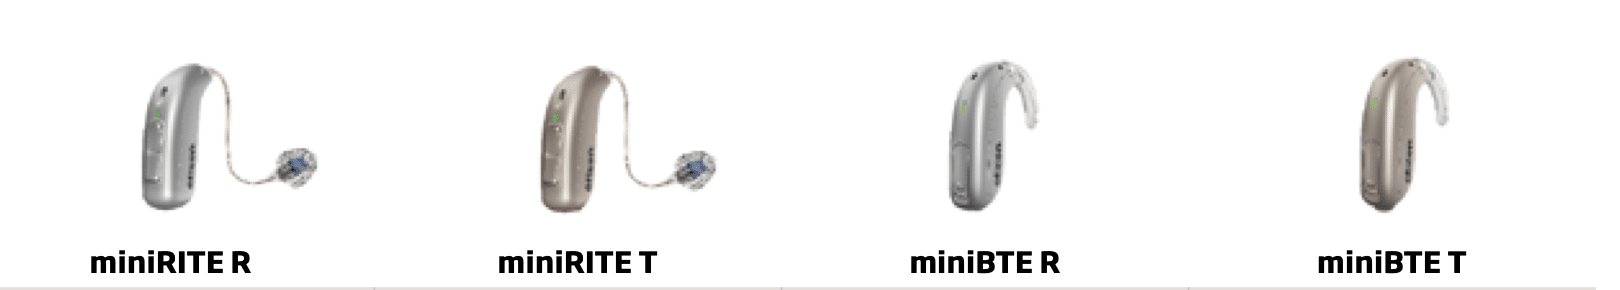 The four models of Oticon Real hearing aids displayed in order are the miniRITE R, miniRITE T, miniBTE R, miniBTE T